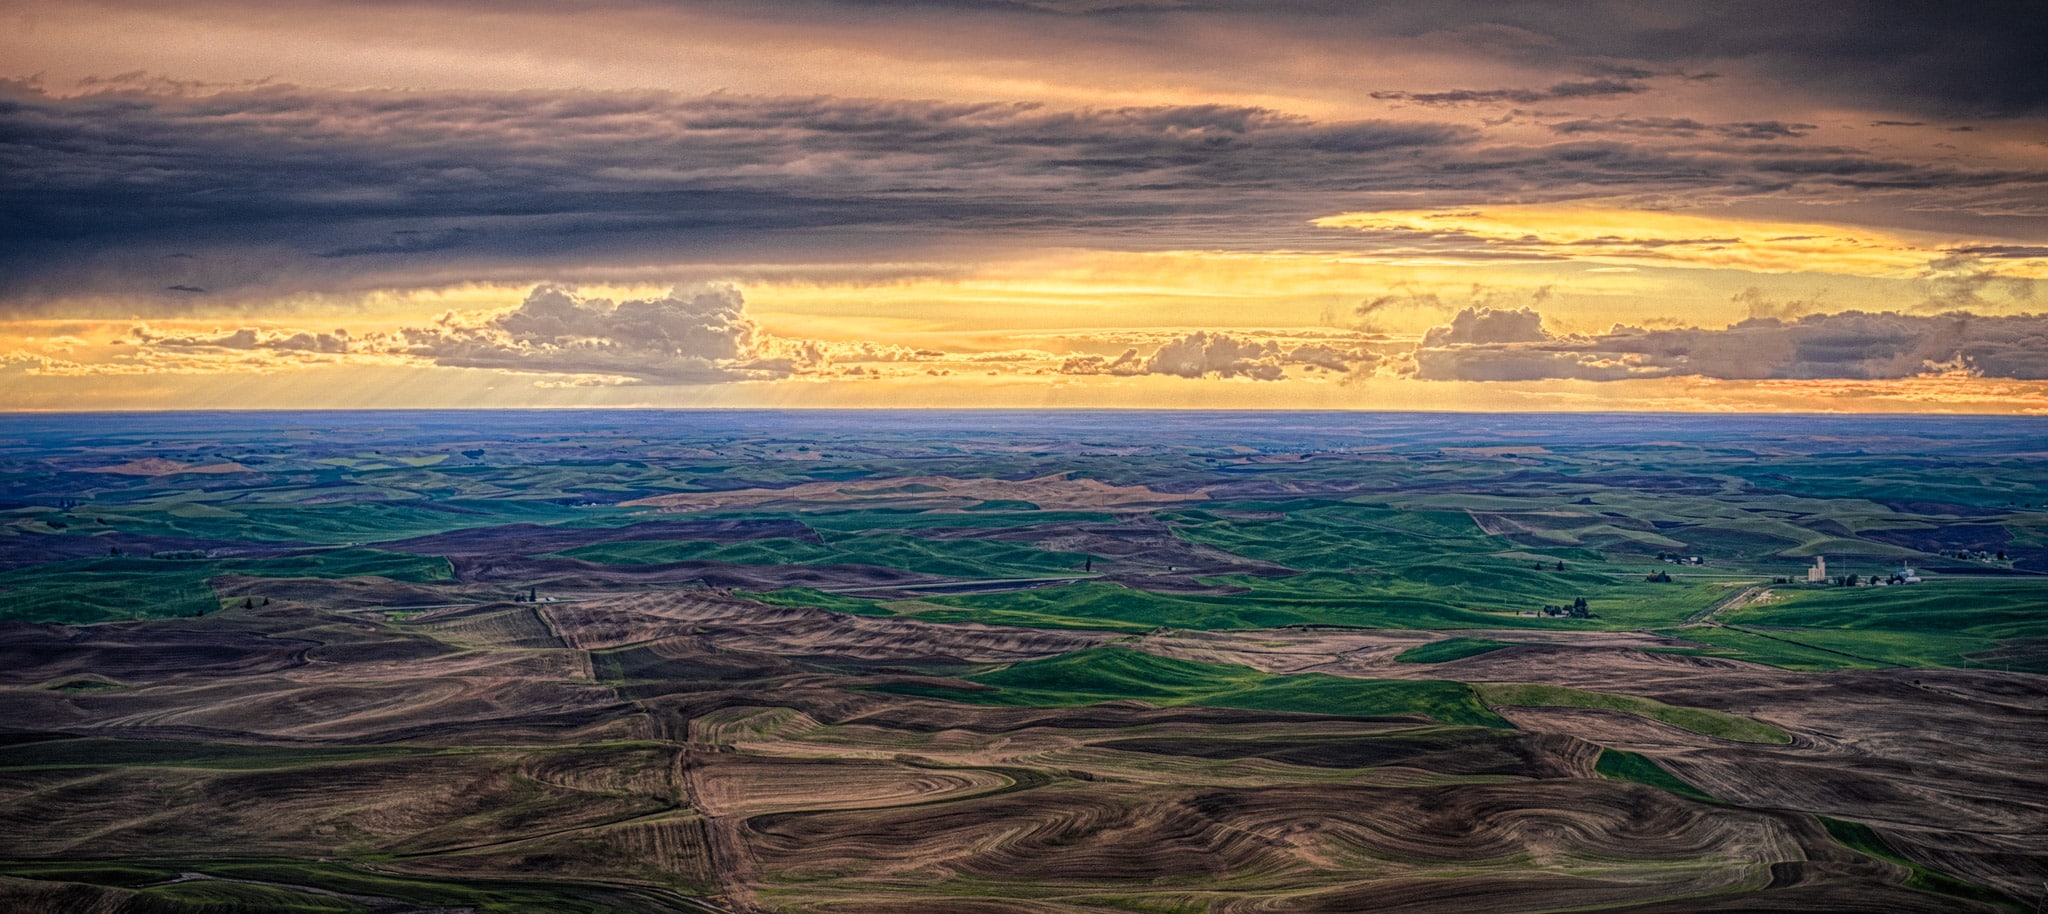 This view of the Palouse hills was taken from Steptoe Butte in Steptoe Butte State Park near Colfax, Washington.